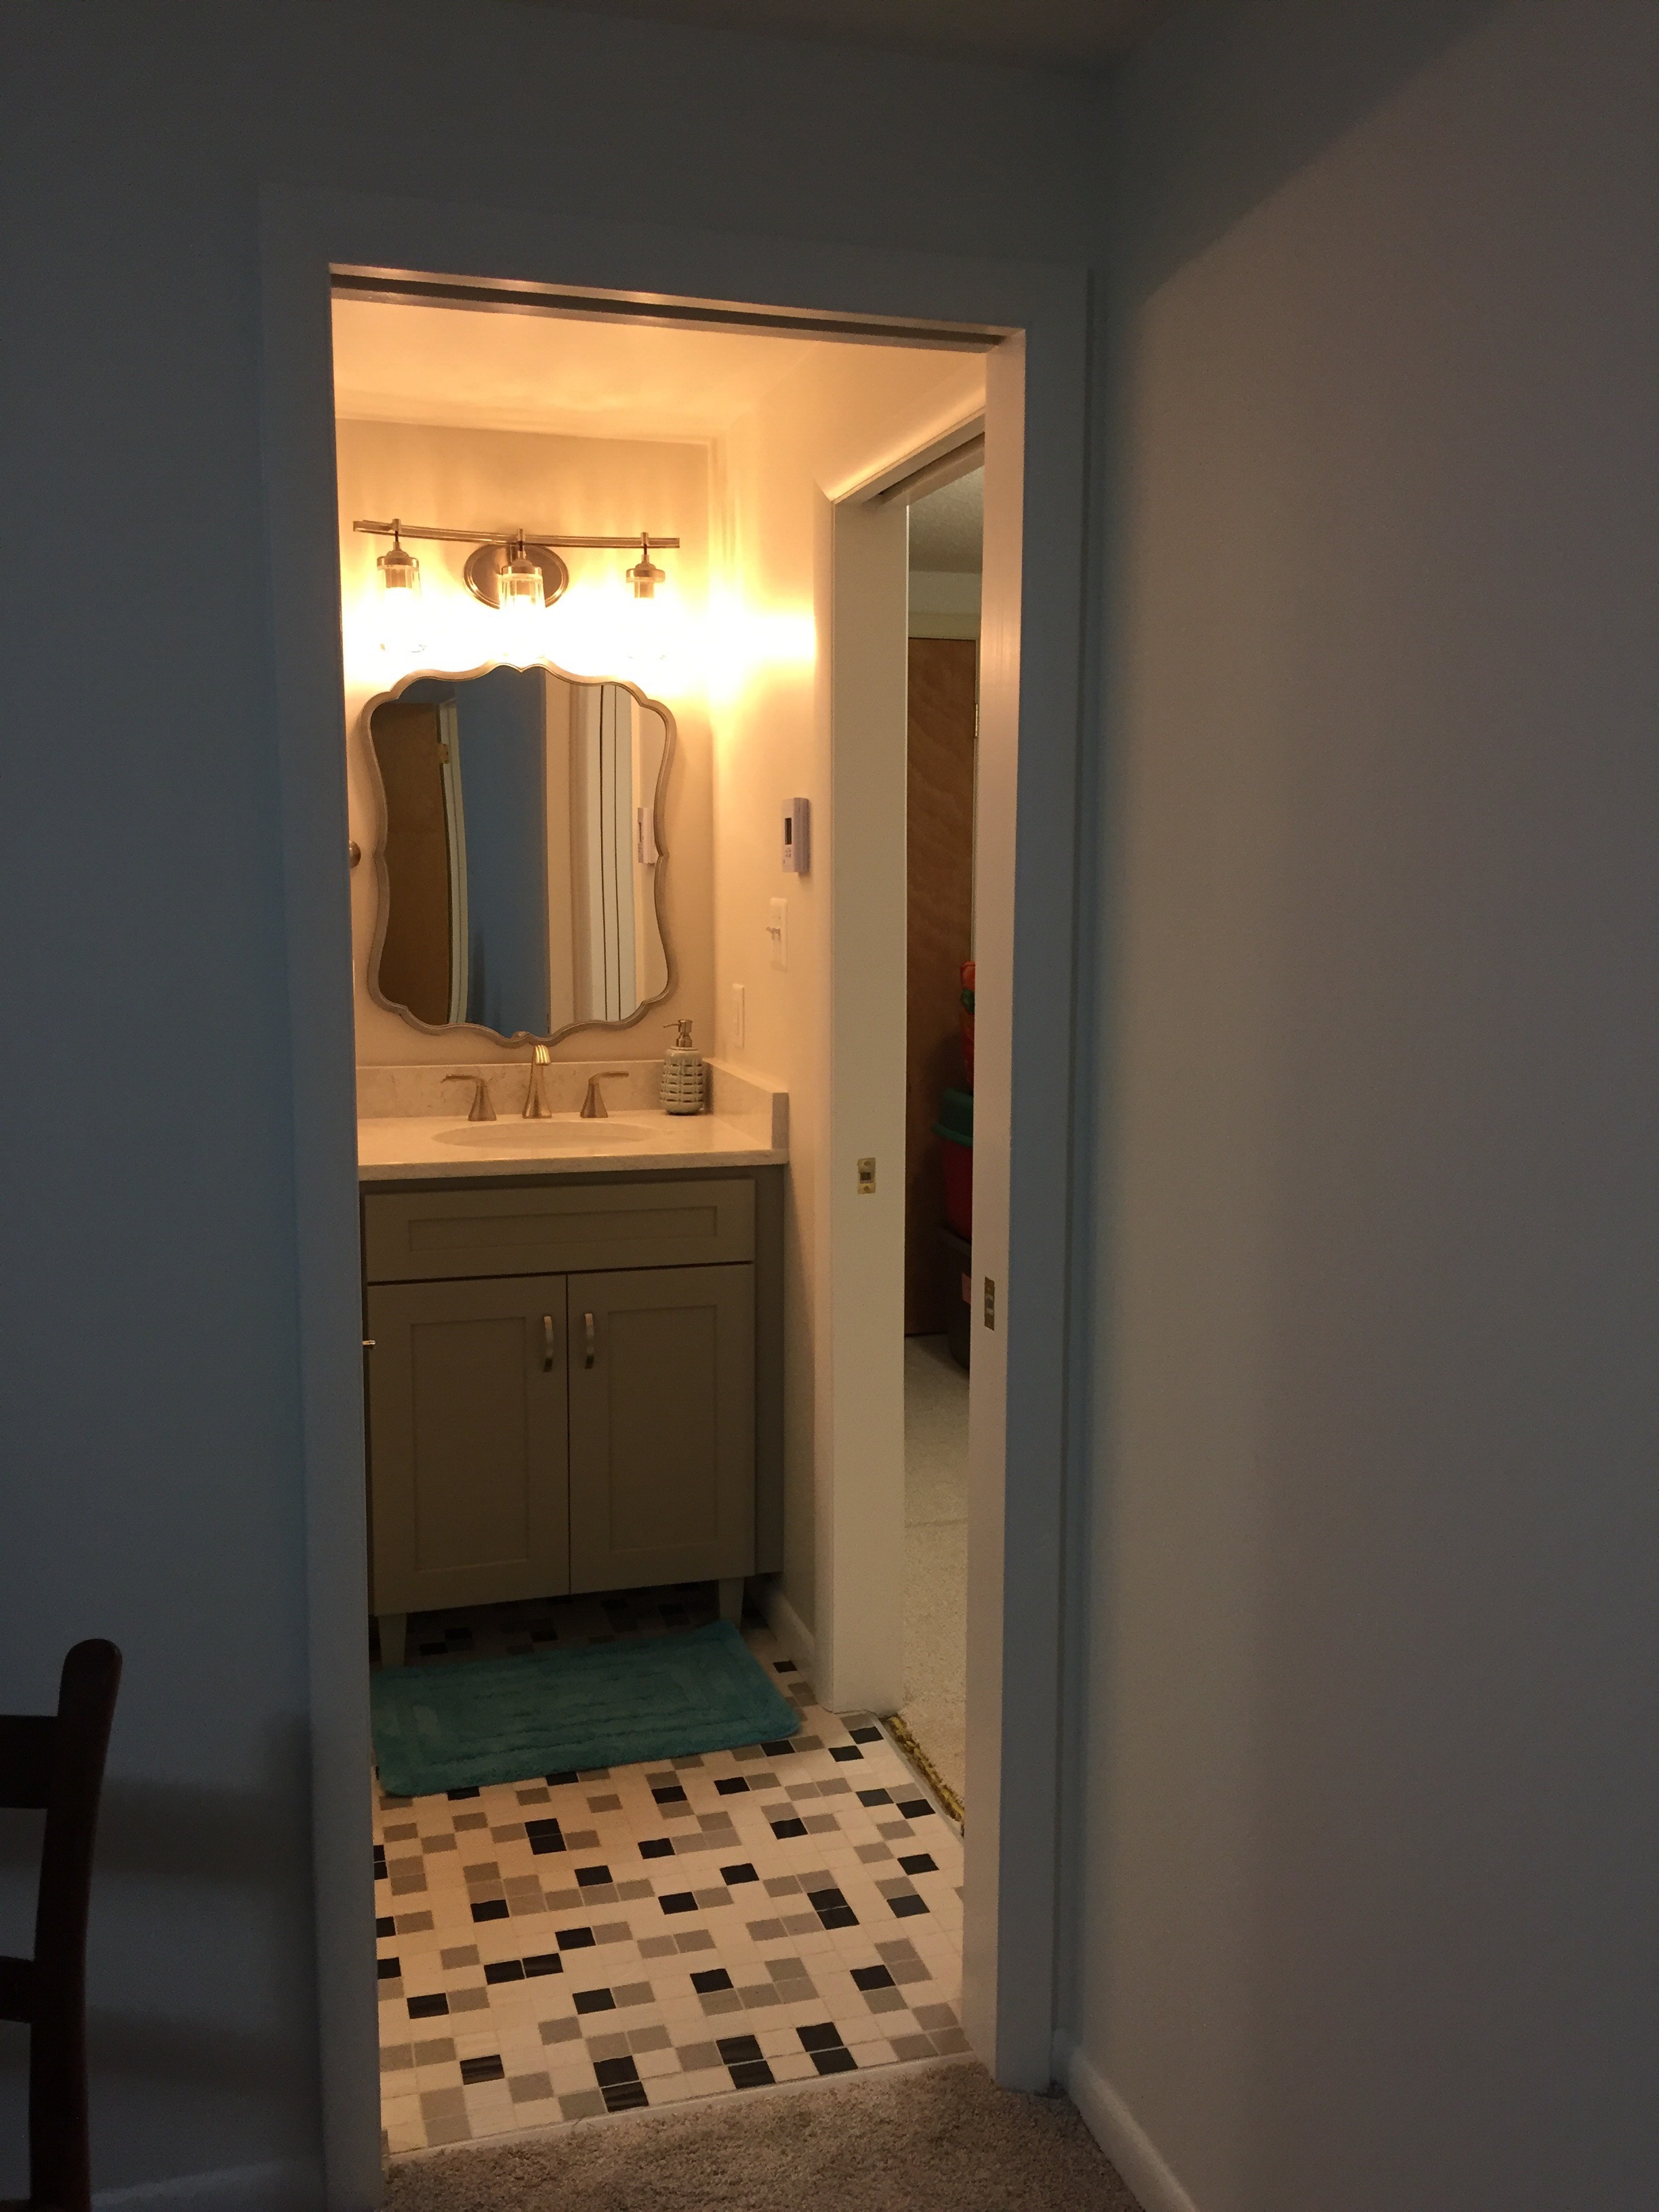  After, a new door into one of the bedrooms provides direct access to the vanity area. 